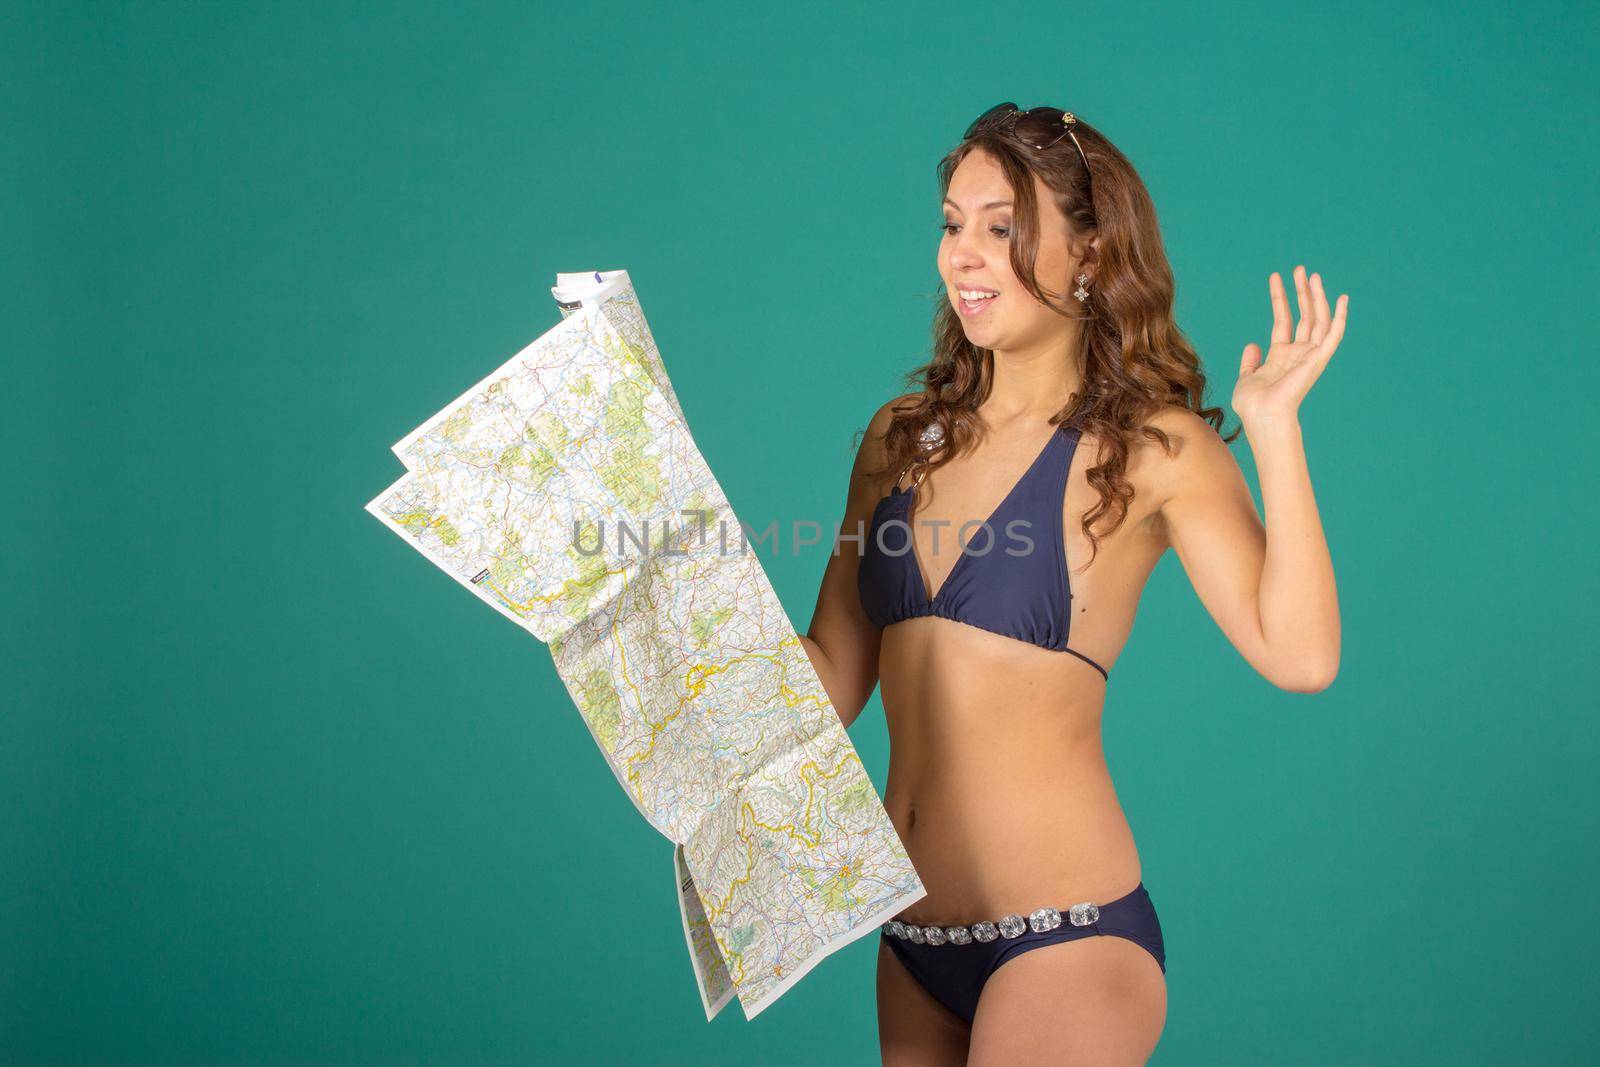 Travel concept. Studio portrait of pretty young woman taking image with map on green background